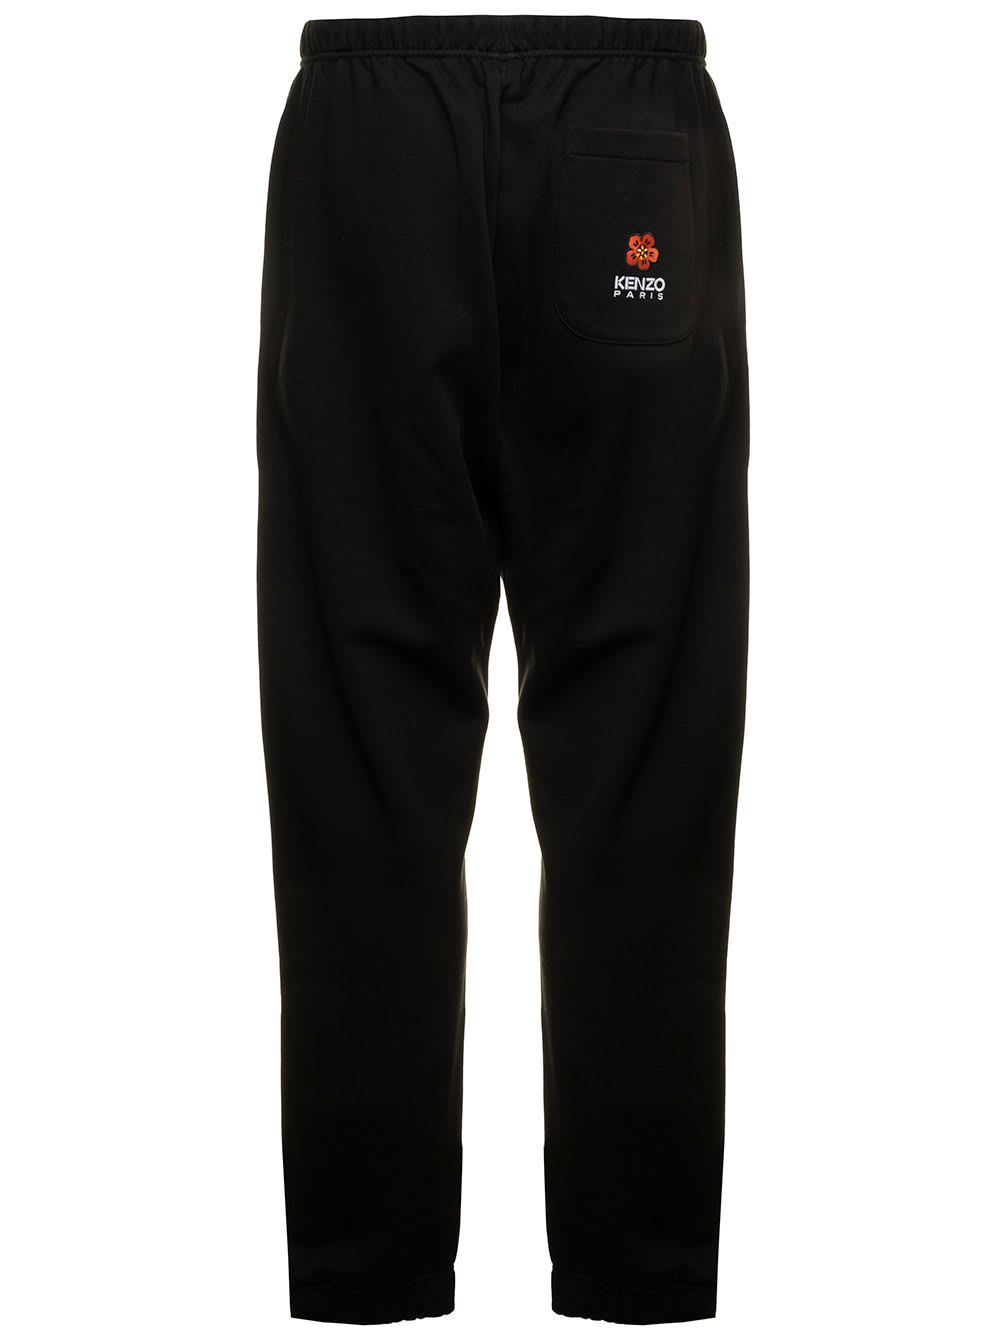 Black Boke Flower Joggers In Light Fleece With Crest And Logo Embroideries Kenzo Man